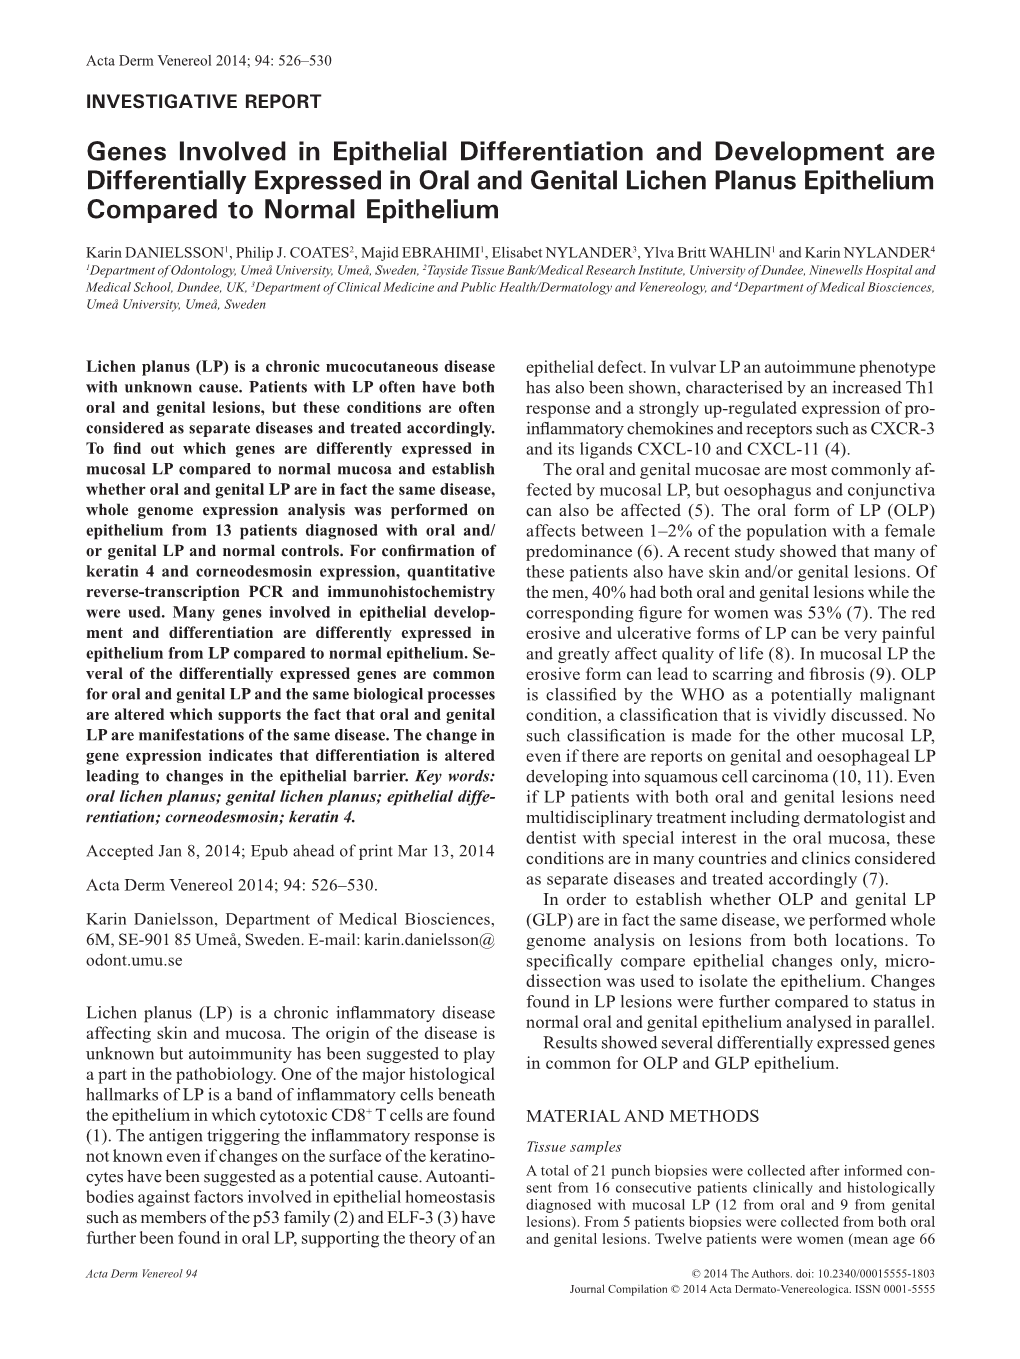 Genes Involved in Epithelial Differentiation and Development Are Differentially Expressed in Oral and Genital Lichen Planus Epithelium Compared to Normal Epithelium